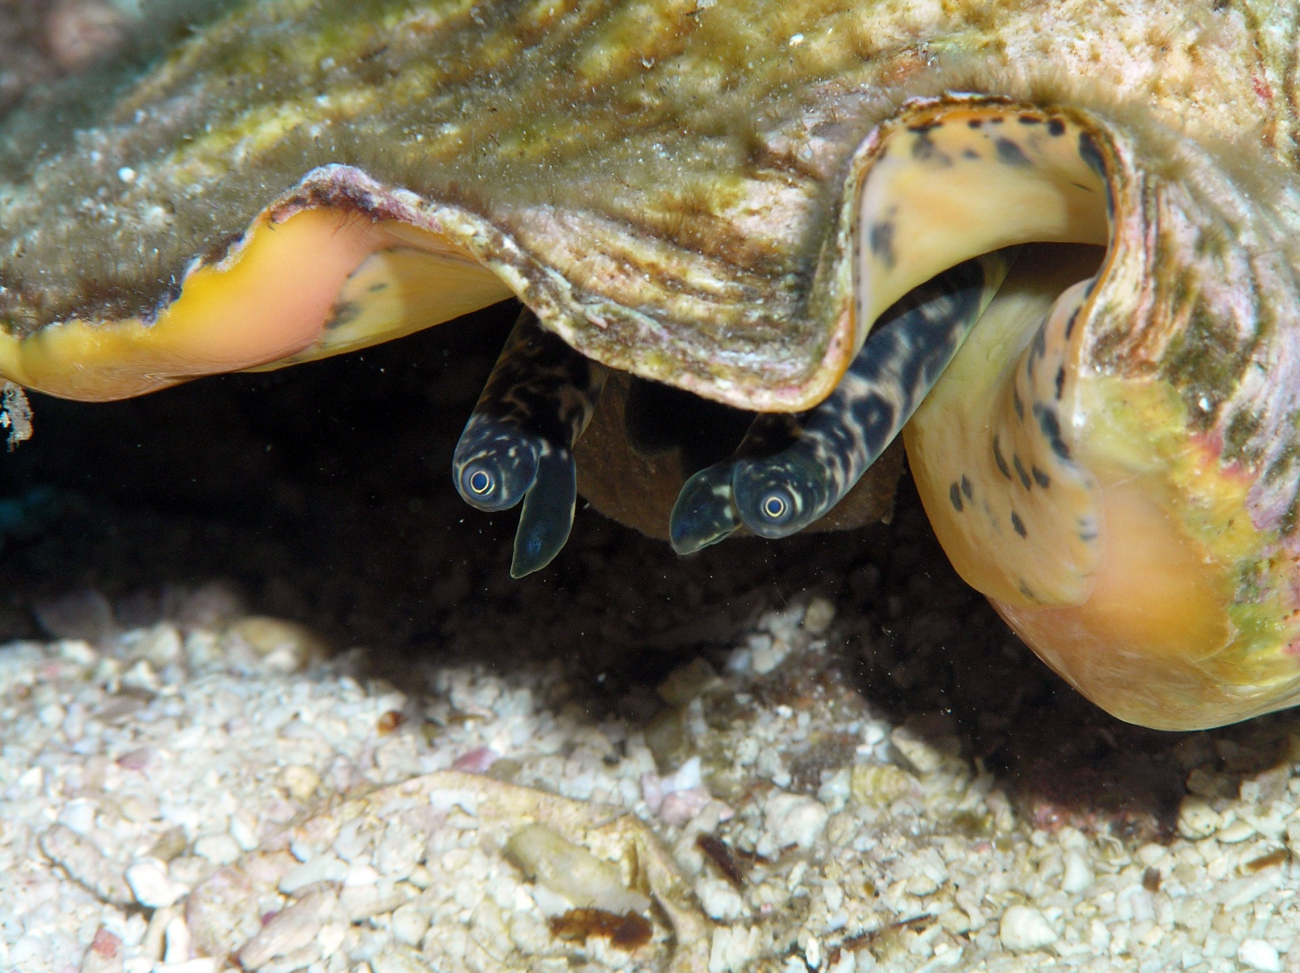 A close-up look at the eye stalks of a queen conch (Strombus gigas) observed ina sand flat at West Flower Garden Bank